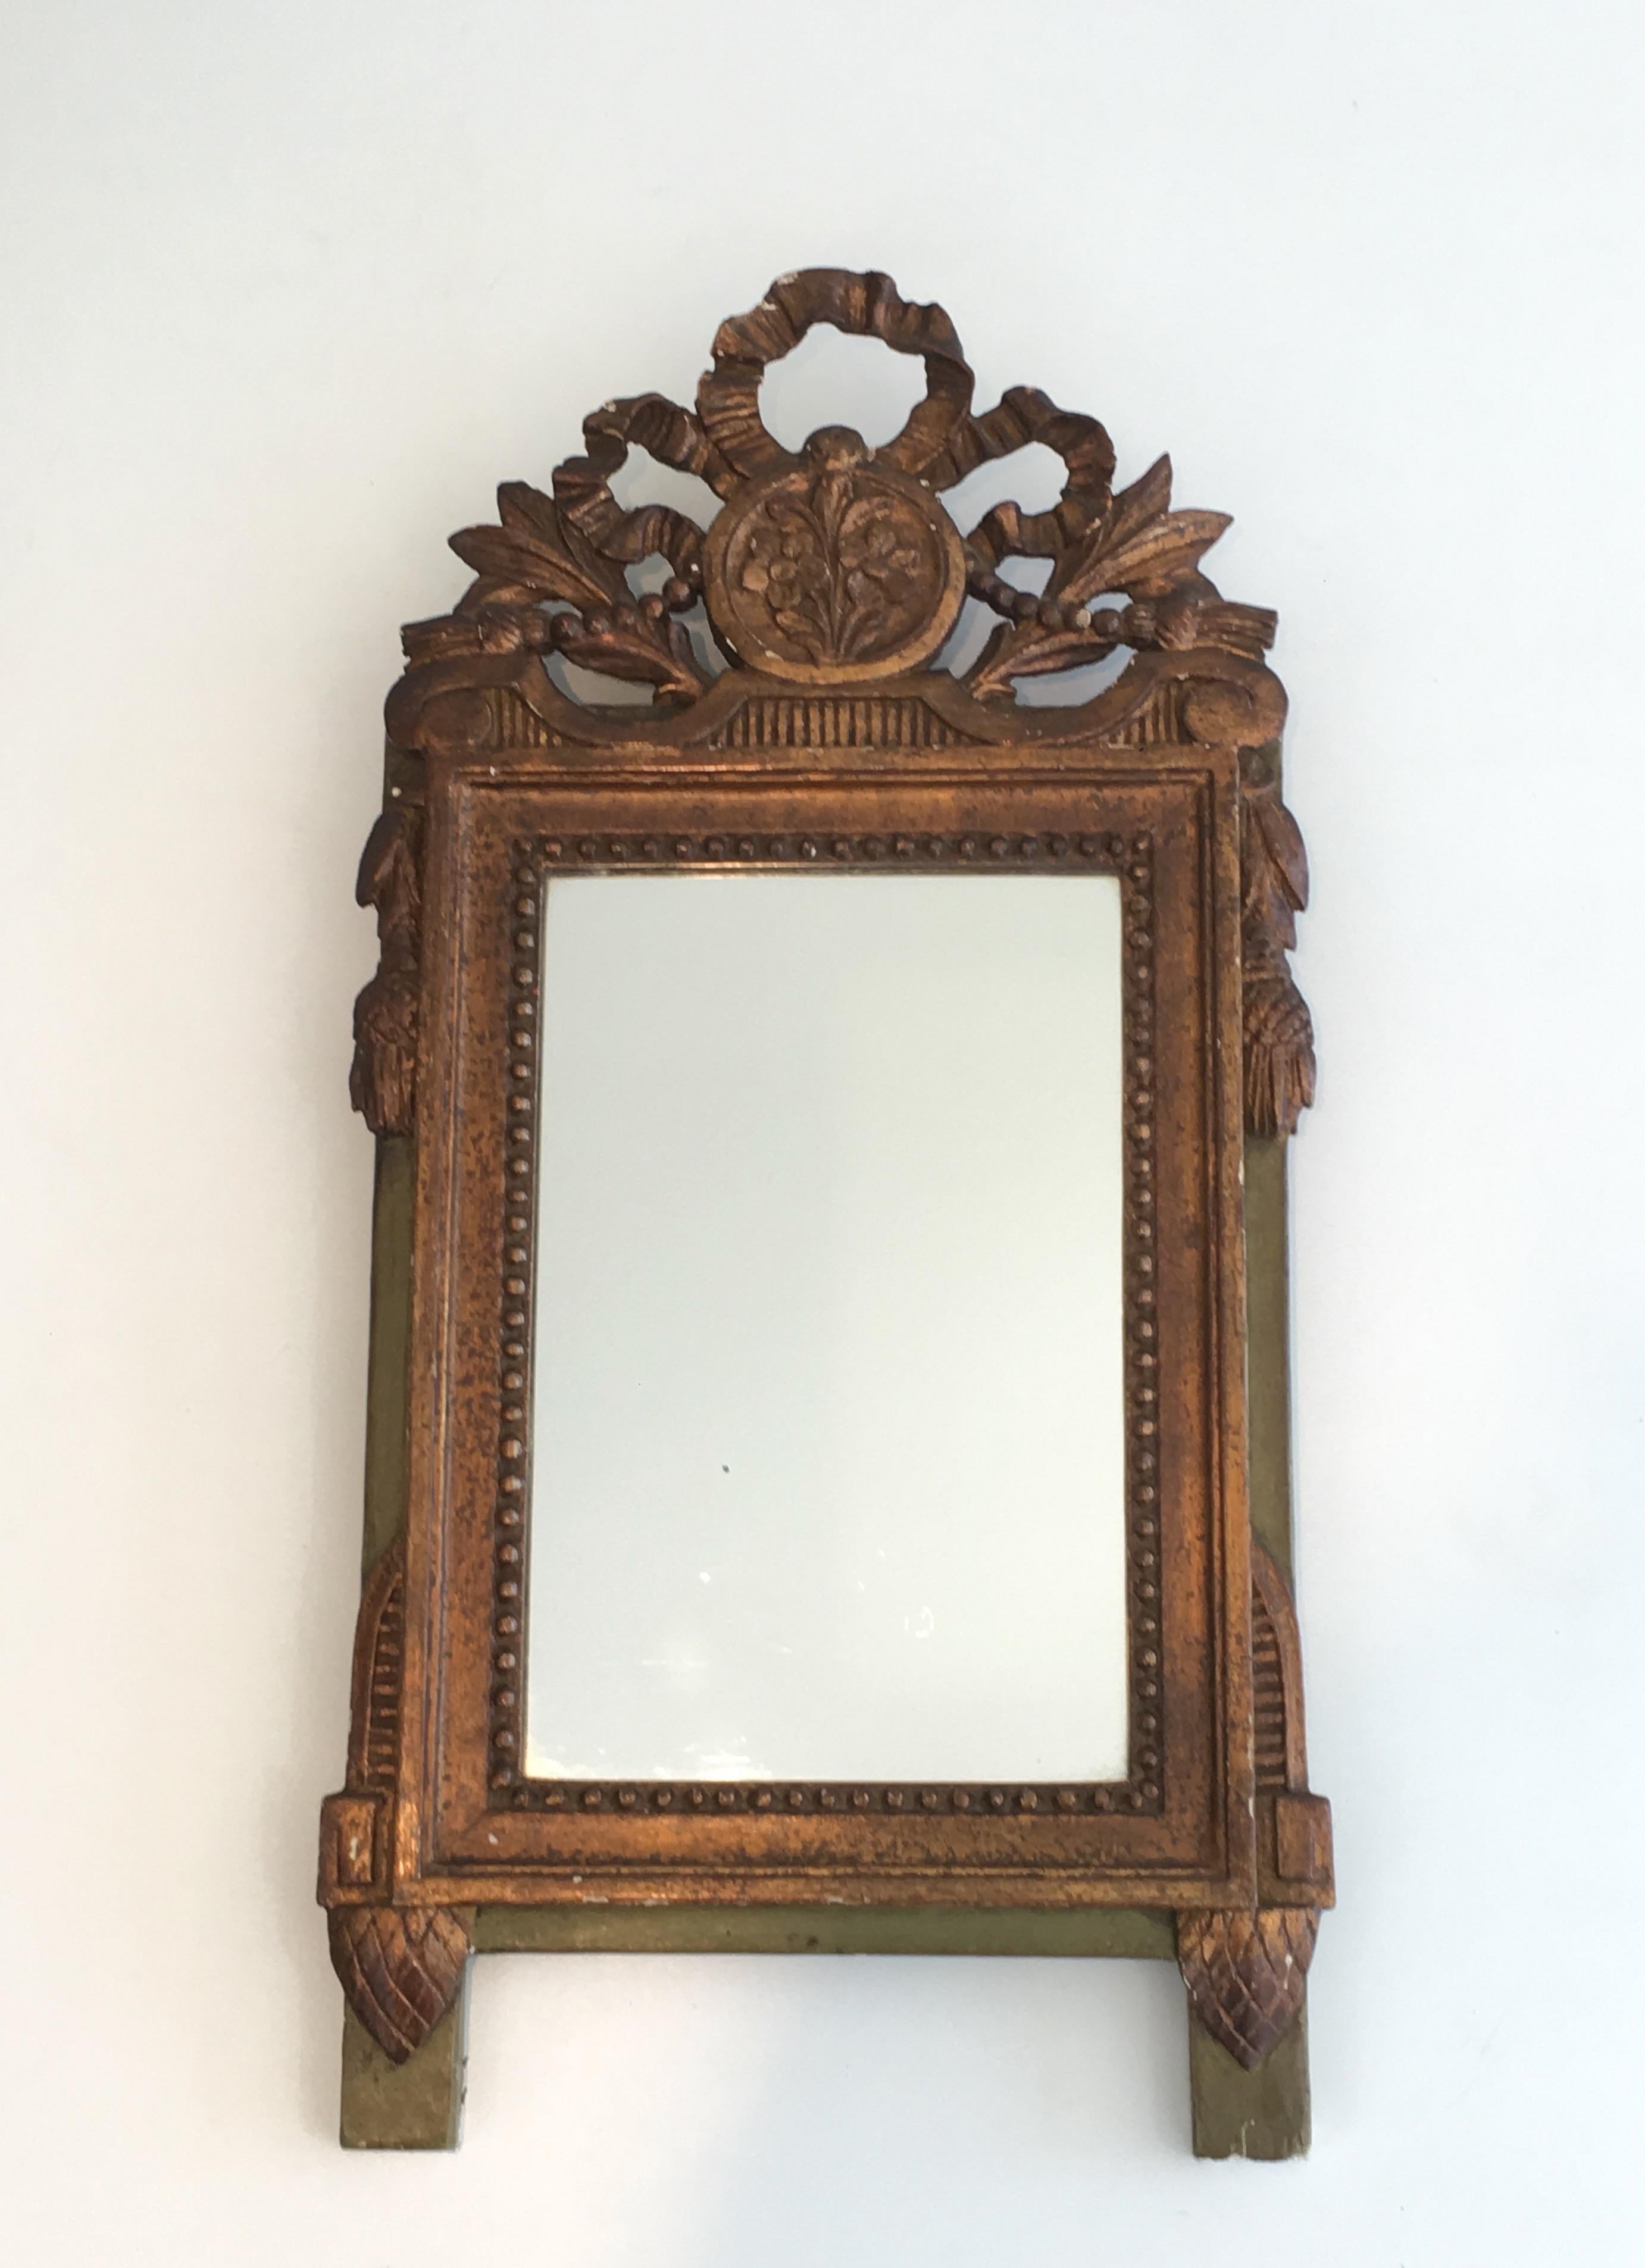 Louis the xvi Style Gilt and Painted Wood Mirror, French, 19th Century For Sale 4